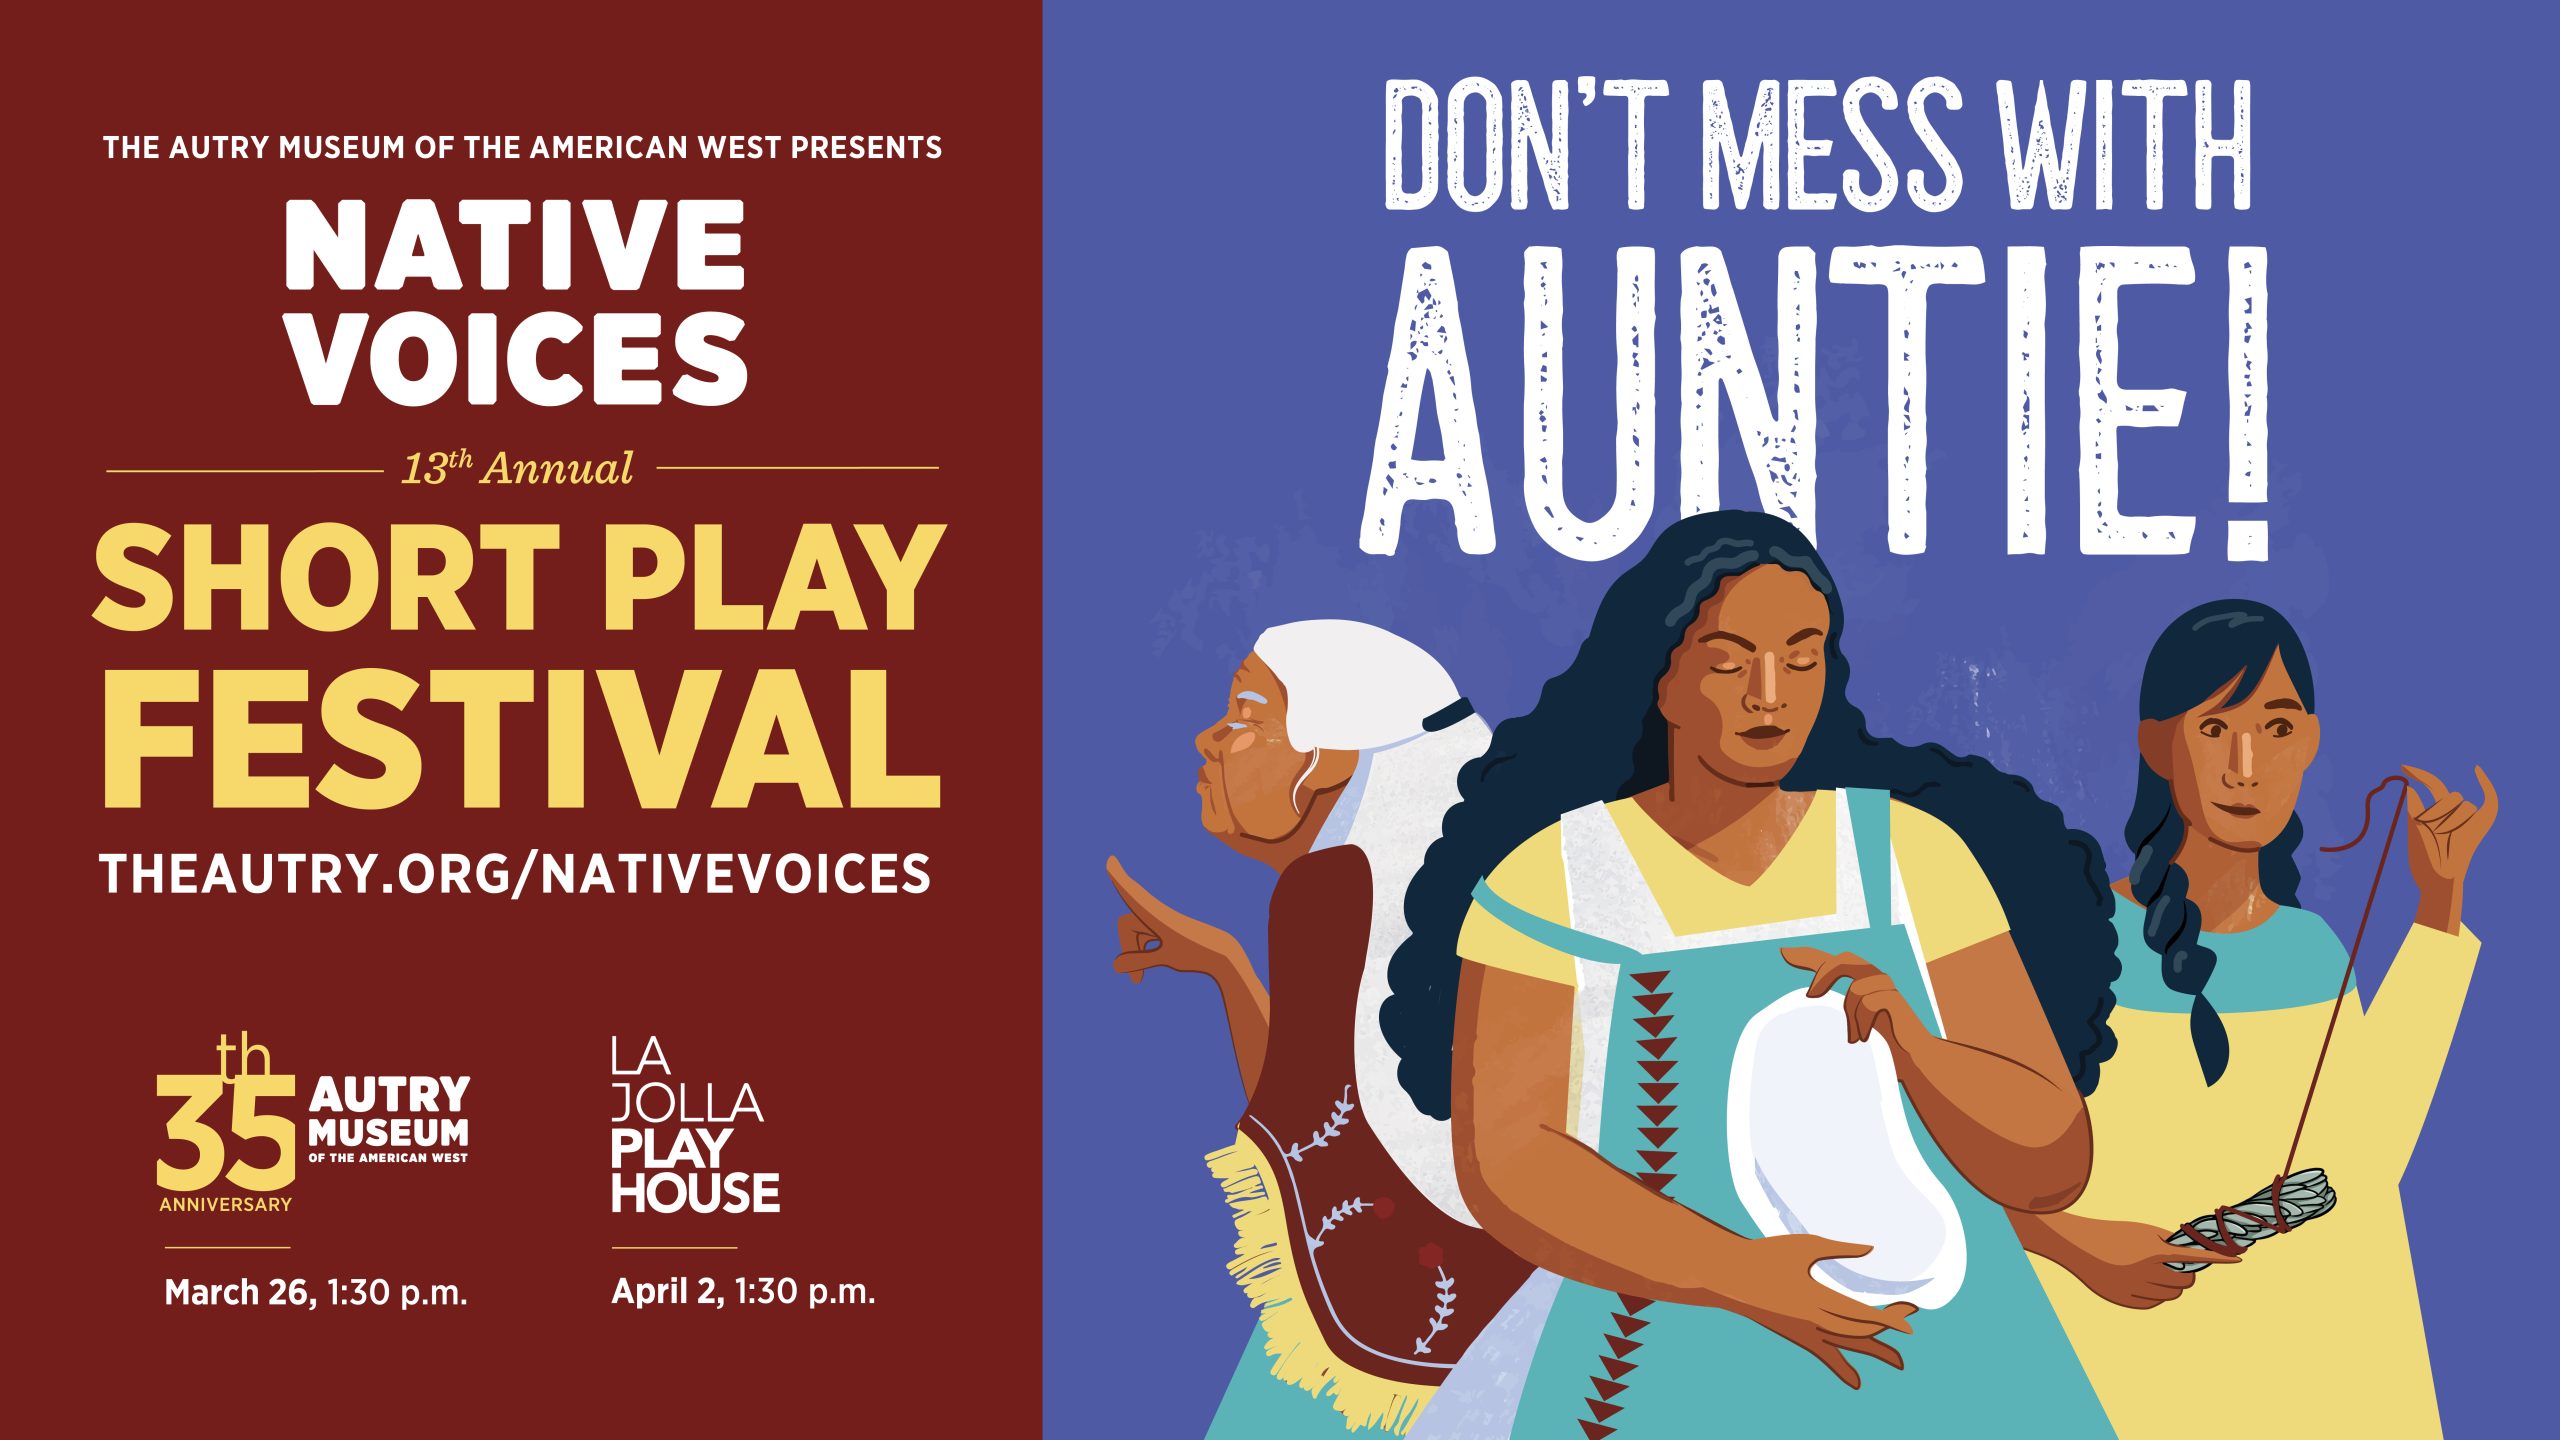 13th Annual Native Voices Short Play Festival - Don’t Mess with Auntie!